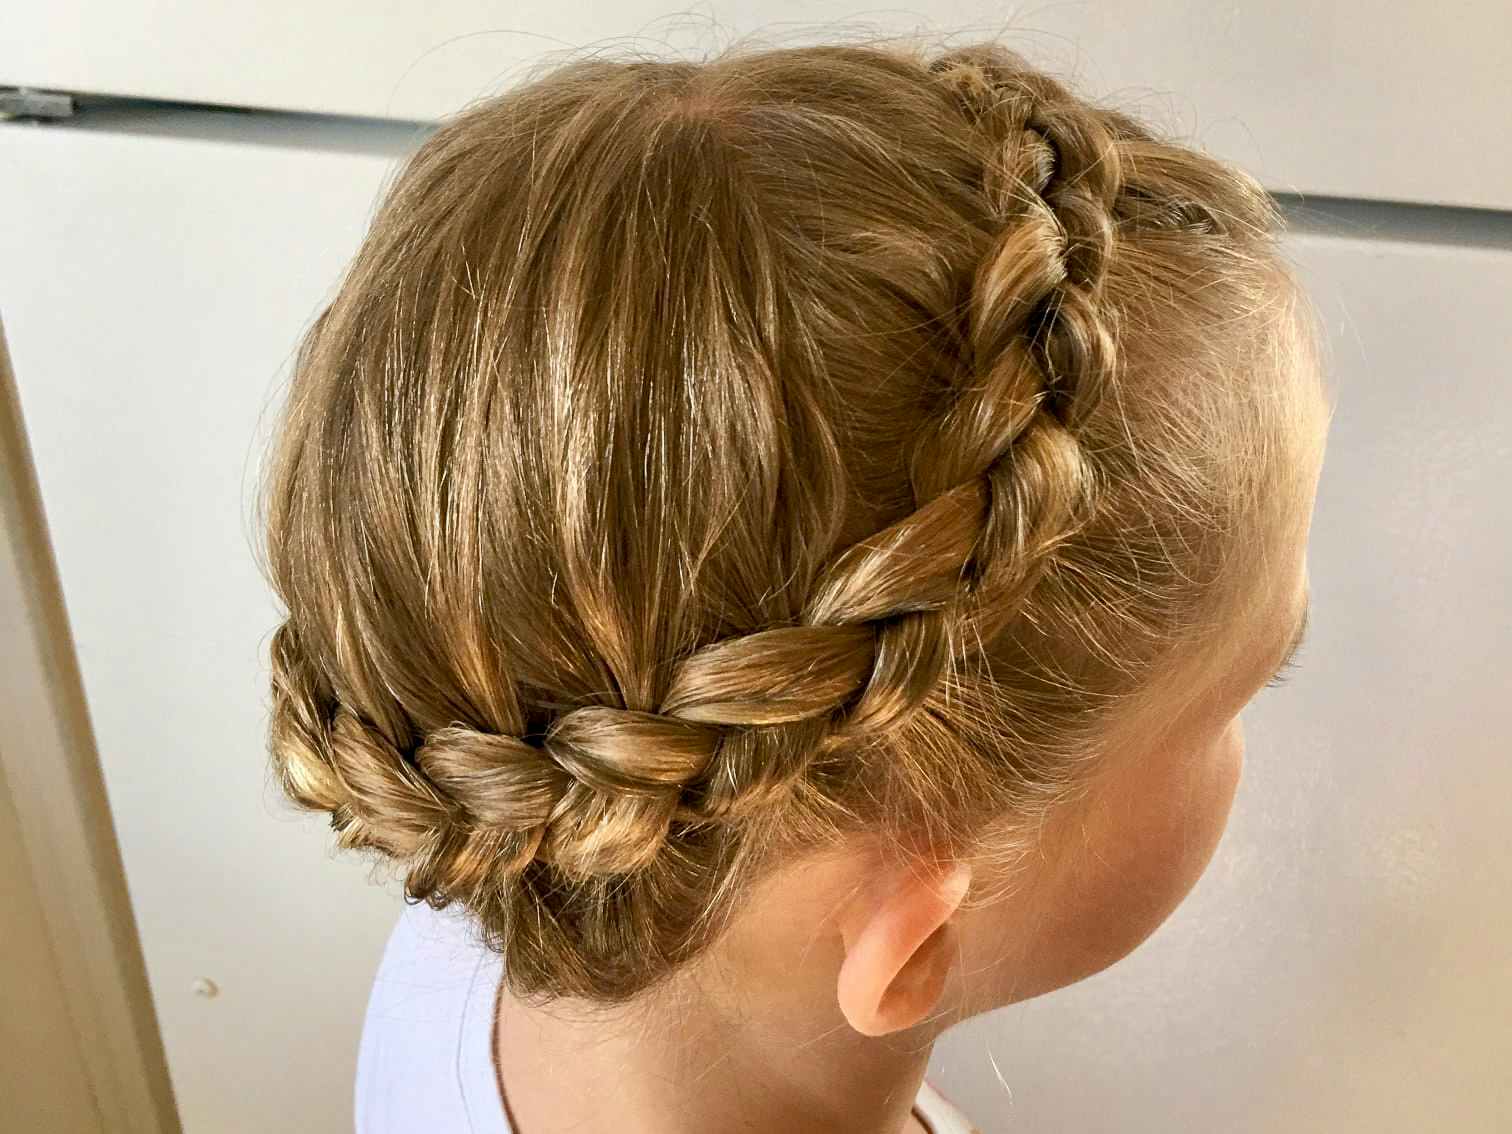 A young girl with a crown braid